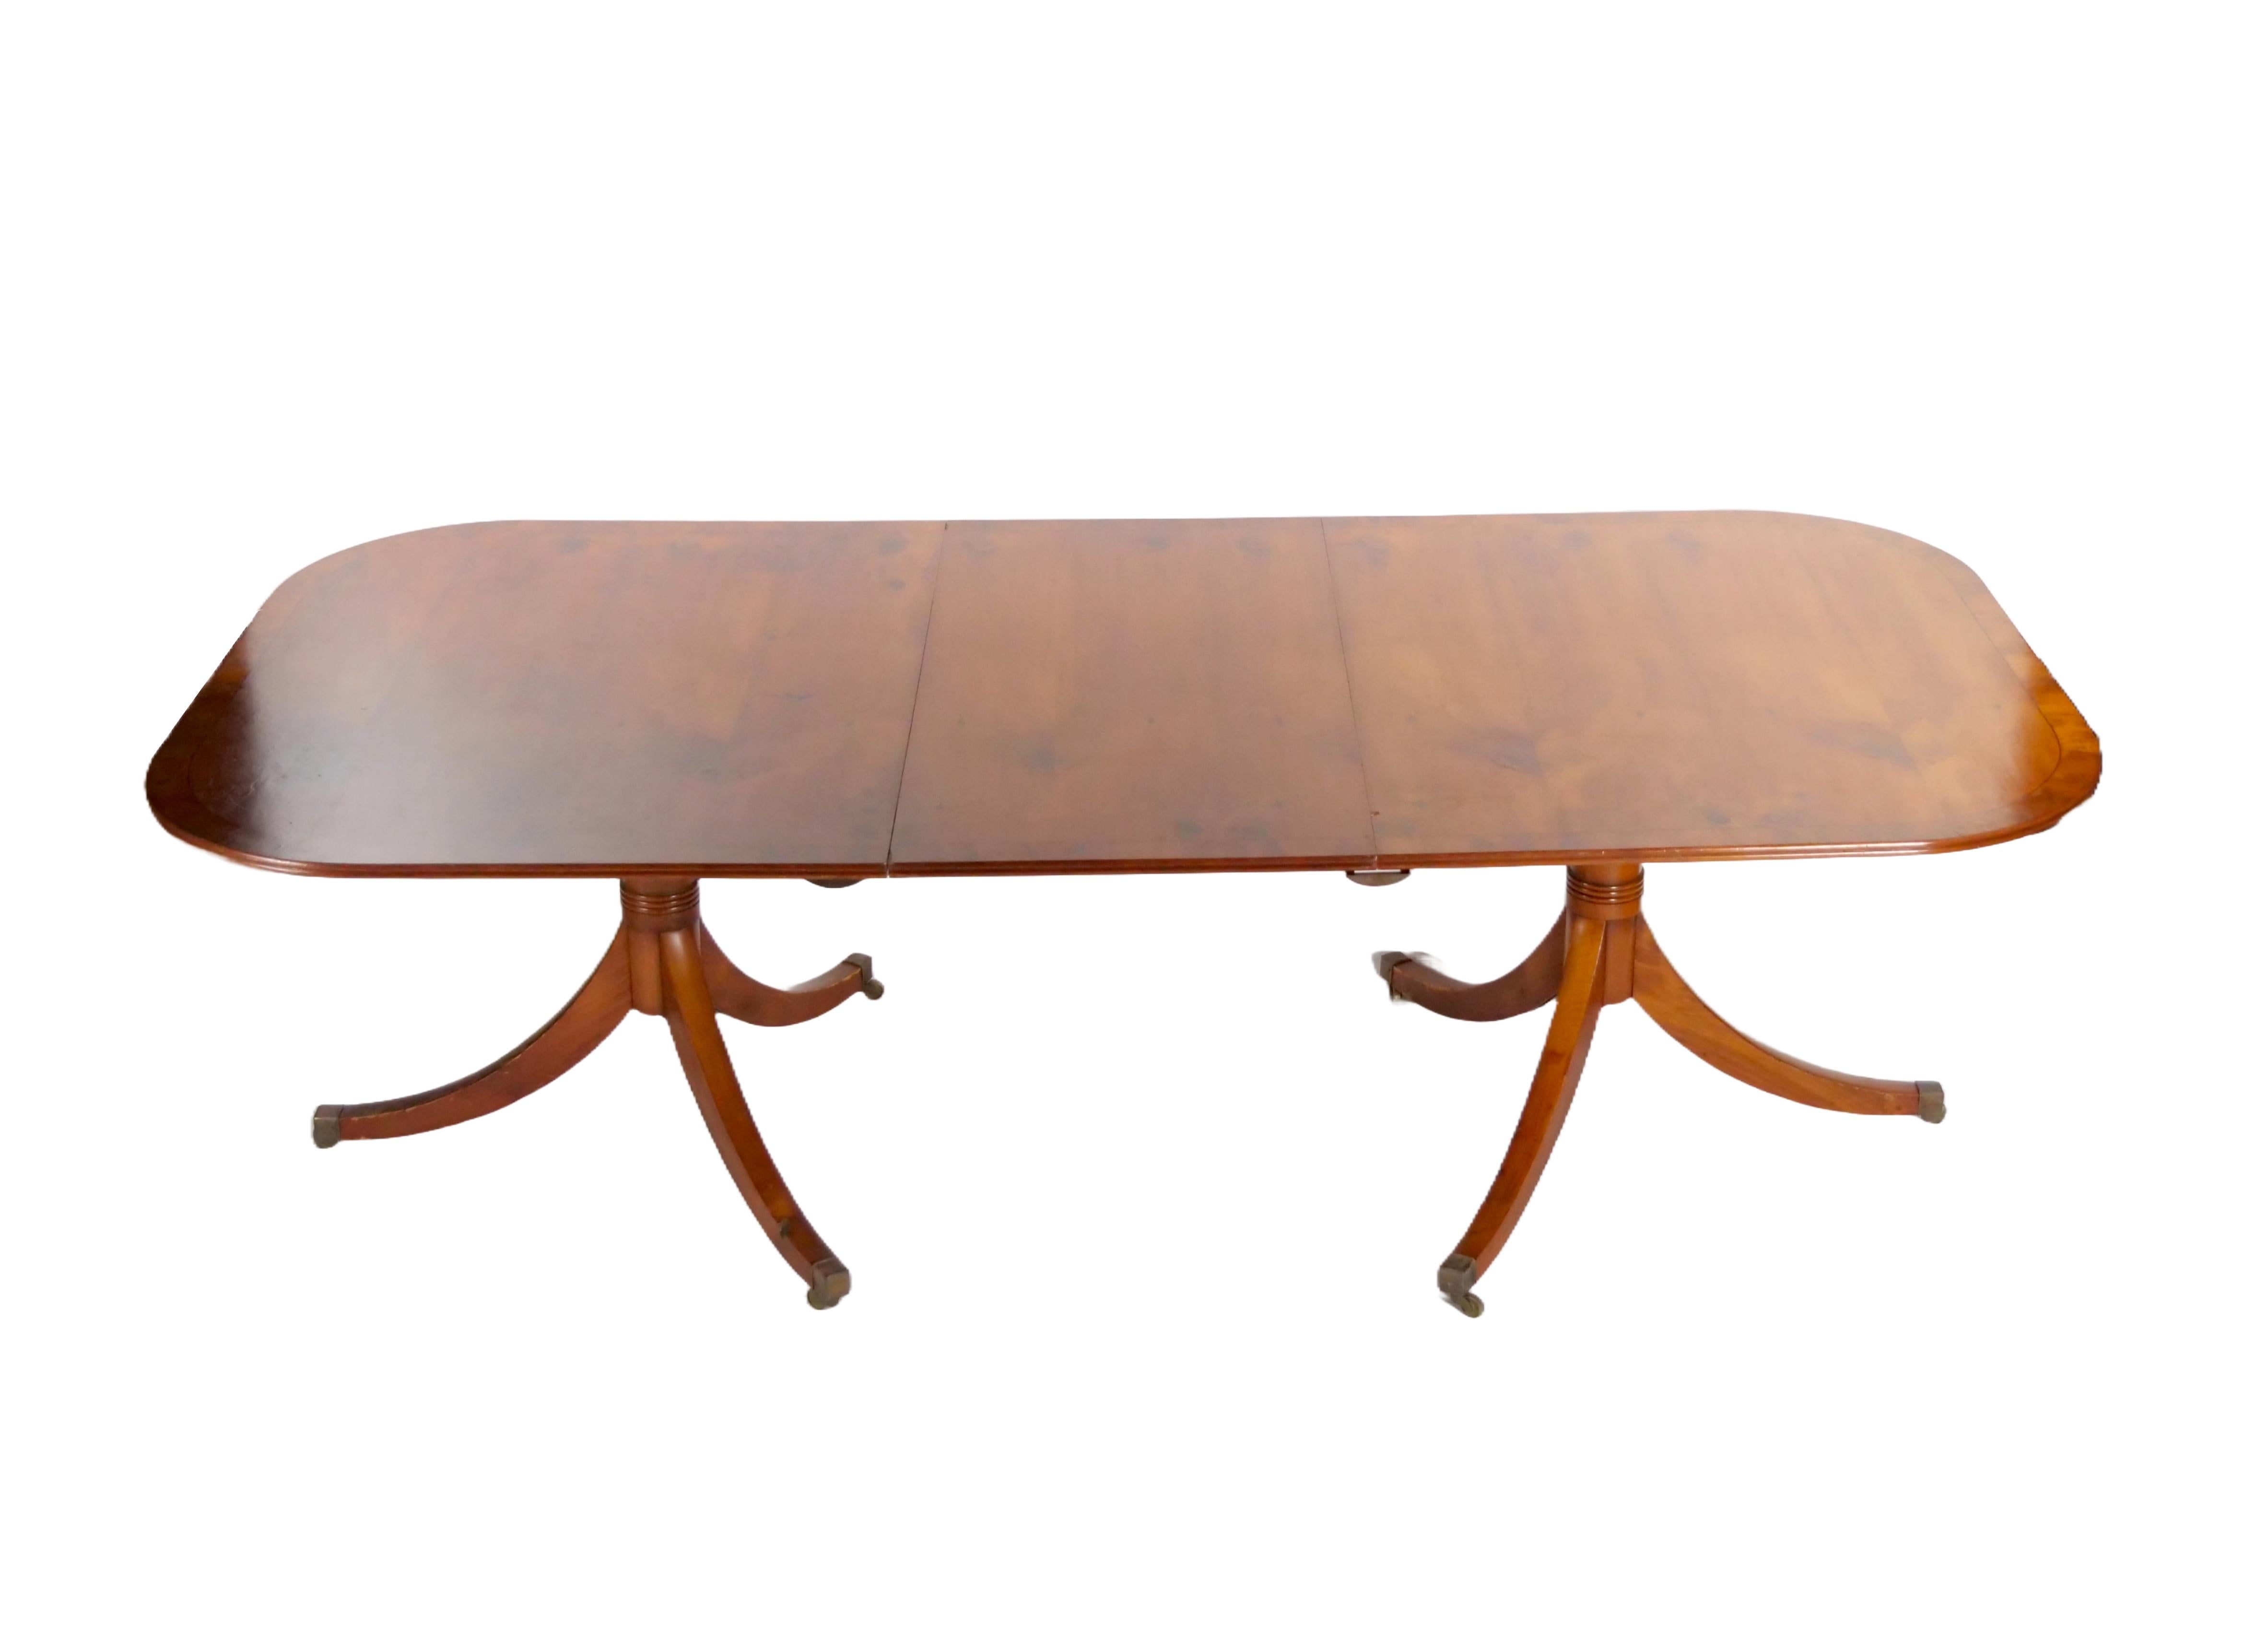 Add a touch of timeless elegance to your dining room with this Mid-19th Century English Burl Walnut mahogany Dining Table in the Regency / American Federal Style.The burl mahogany wood exudes richness and sophistication, capturing the essence of